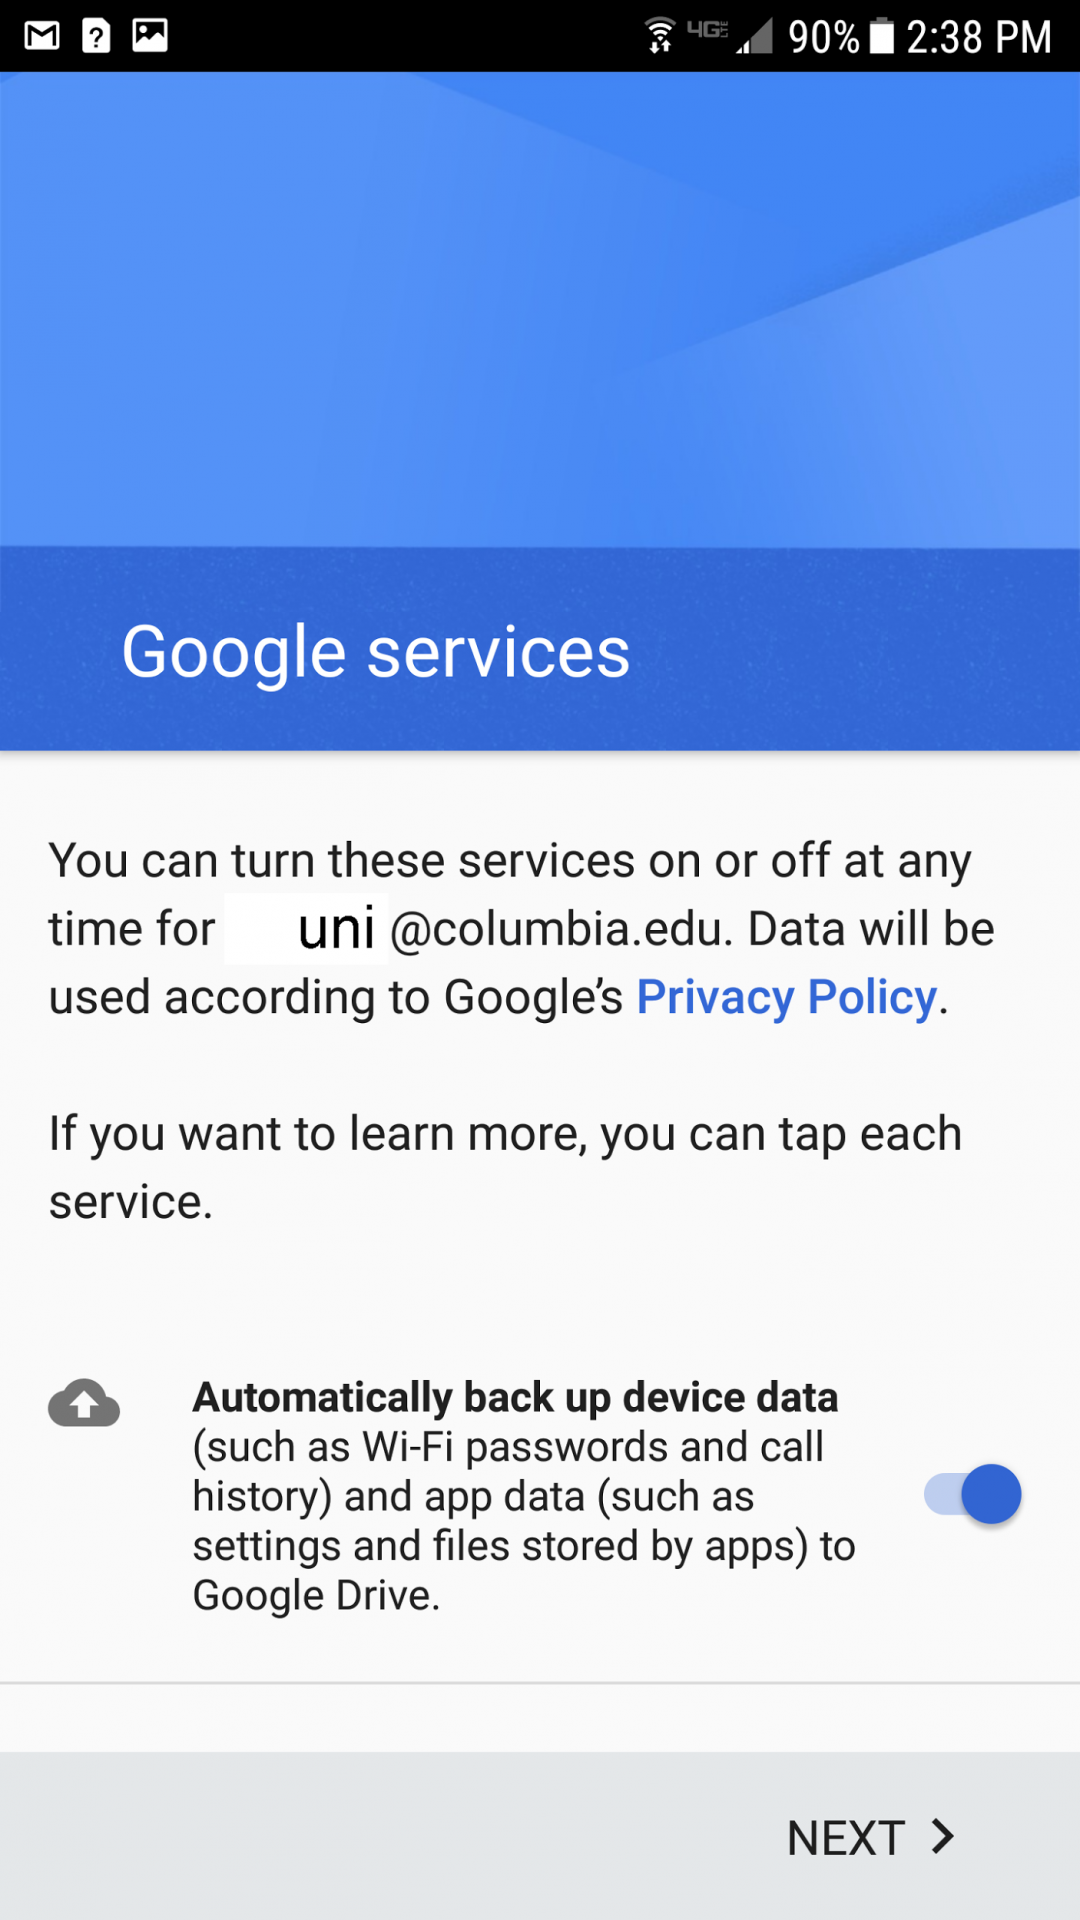 Google services screen for selecting back up preference